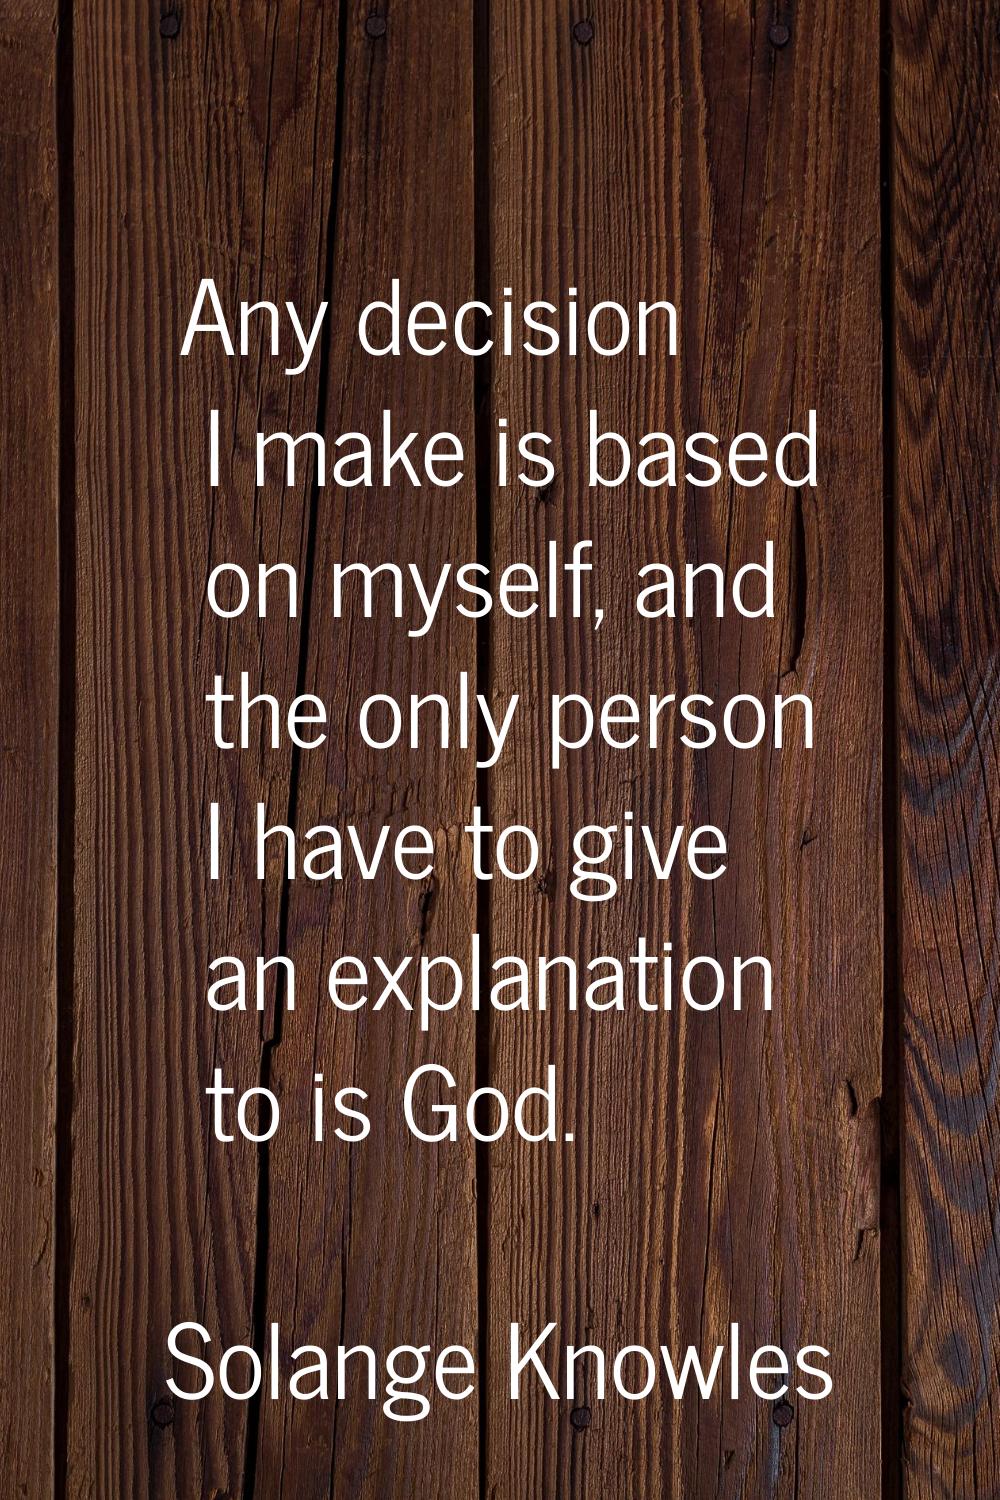 Any decision I make is based on myself, and the only person I have to give an explanation to is God